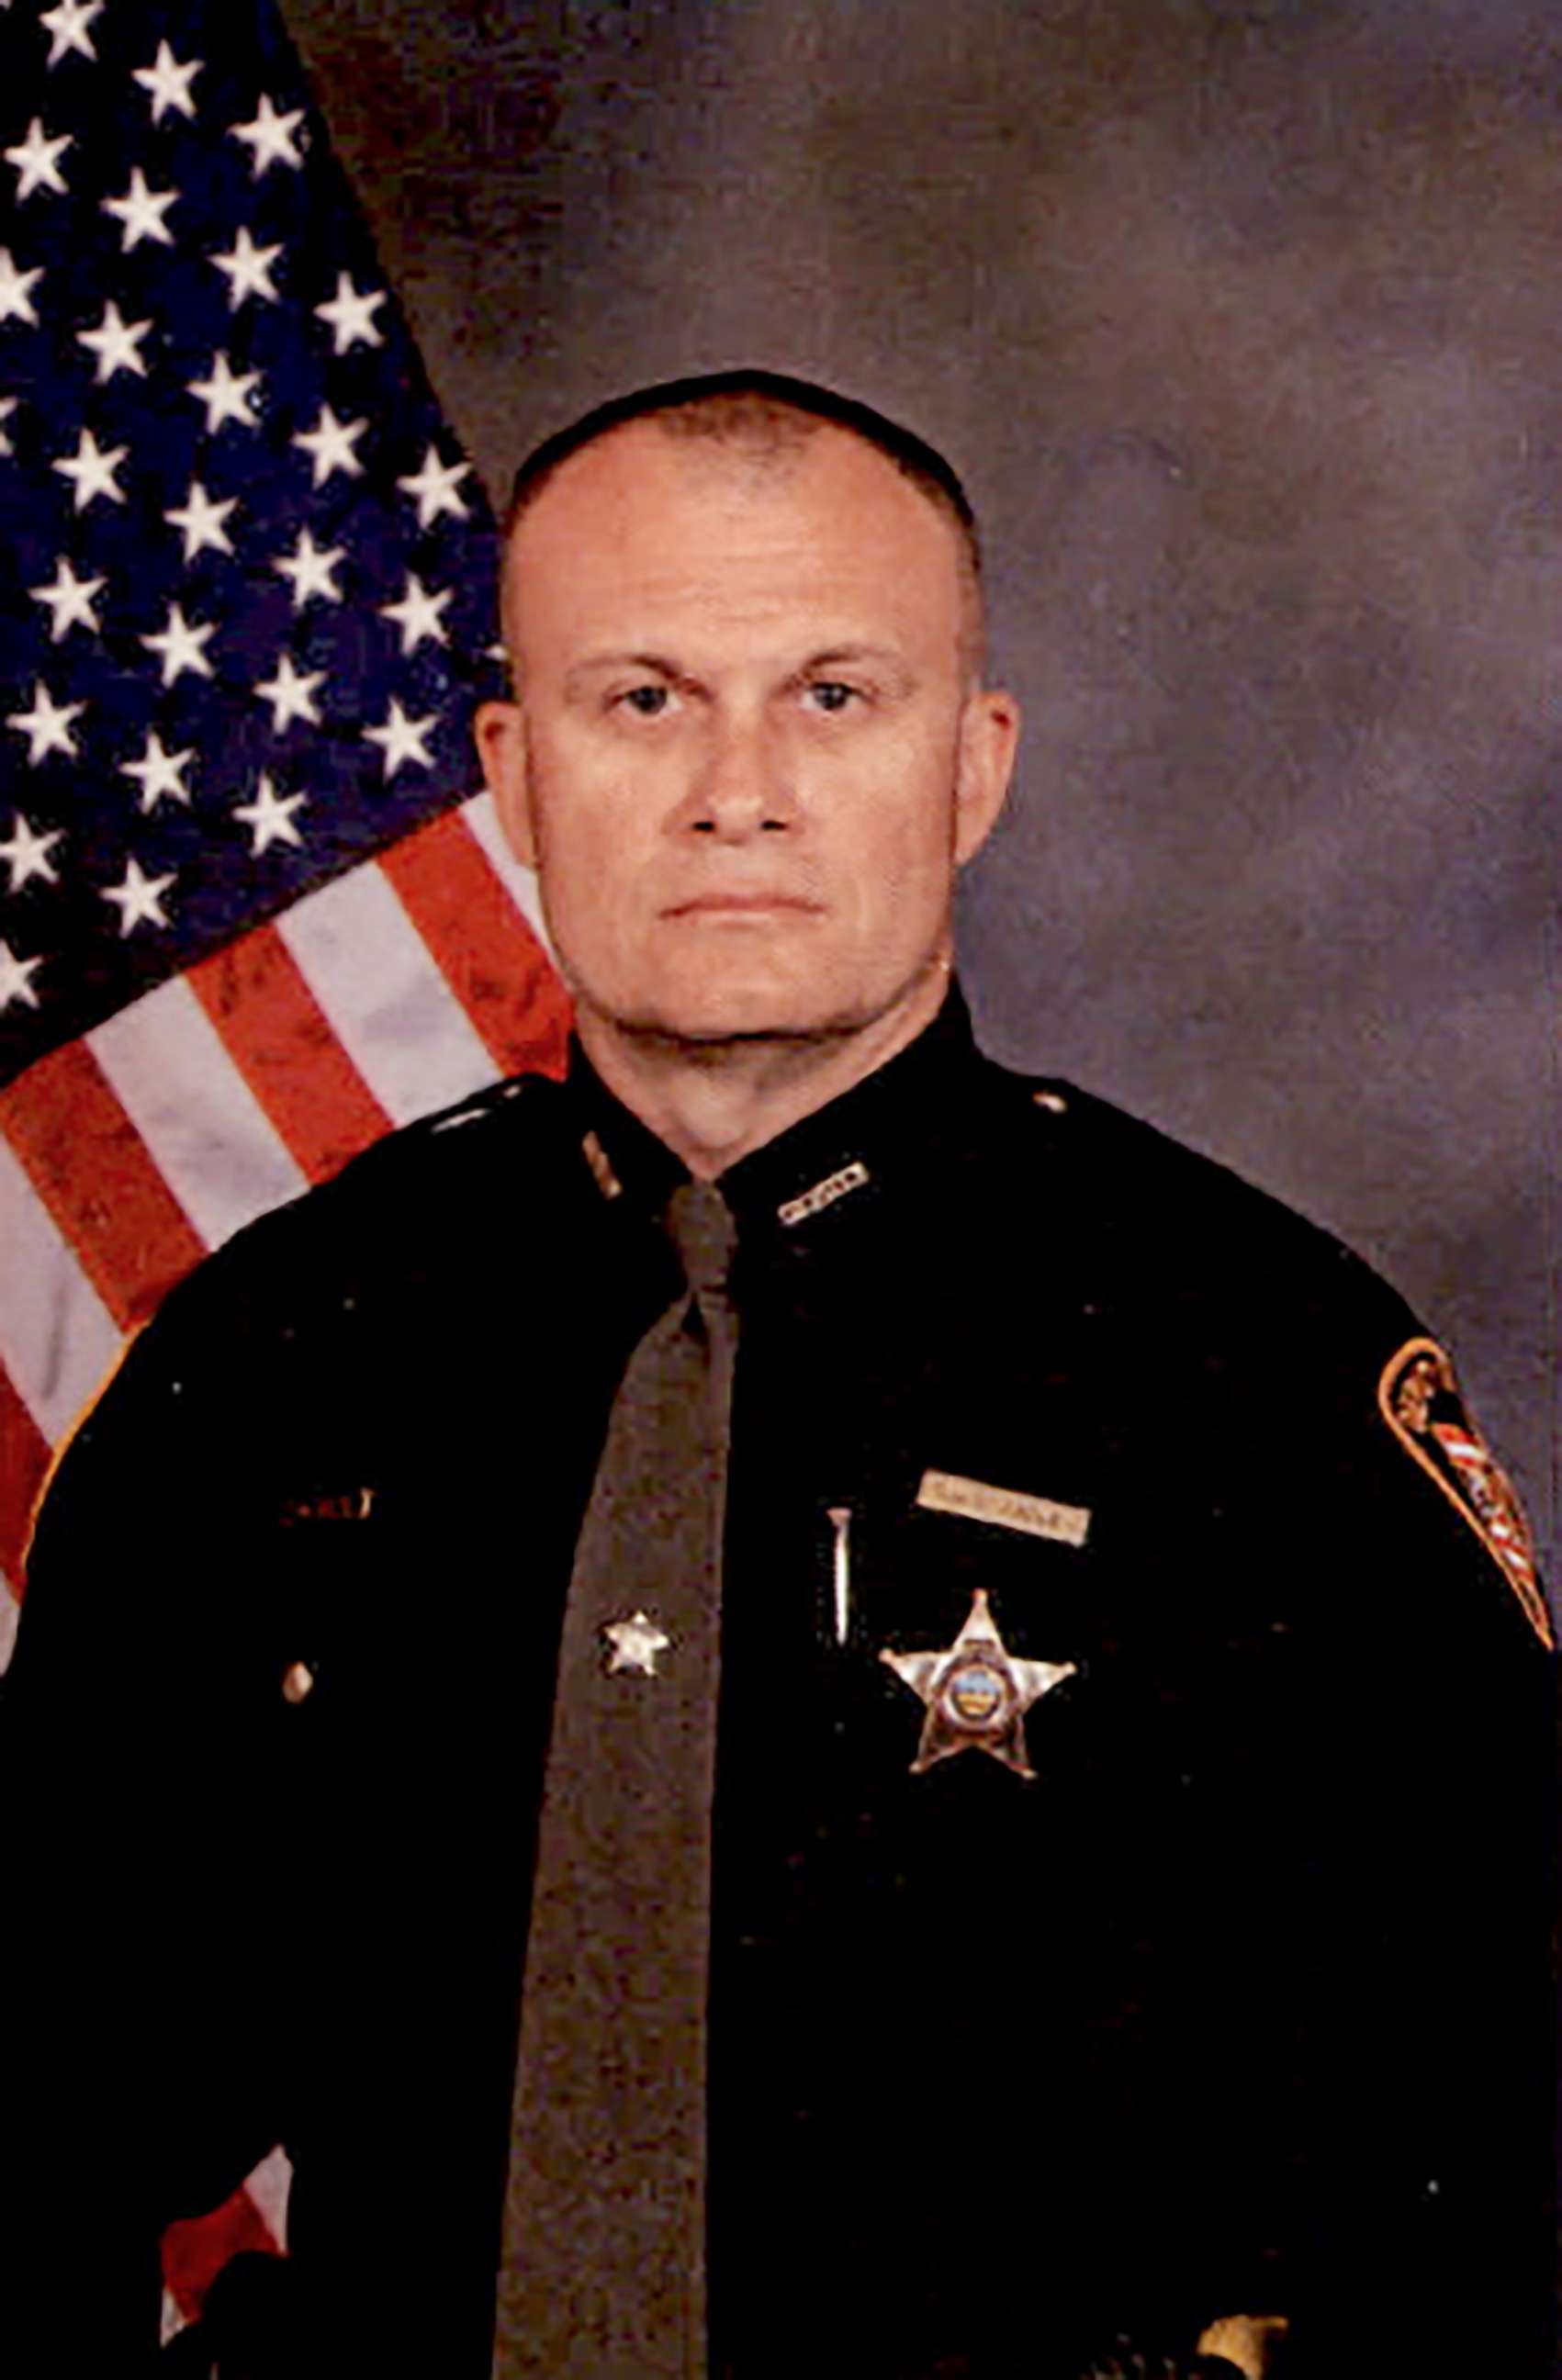 PHOTO: Detective Bill Brewer, a 20-year veteran of the Clermont County Sheriff's Office, died after being shot while investigating a 911 call on Feb. 2, 2019, of an allegedly suicidal man barricaded in an apartment in Pierce Township, Ohio. 